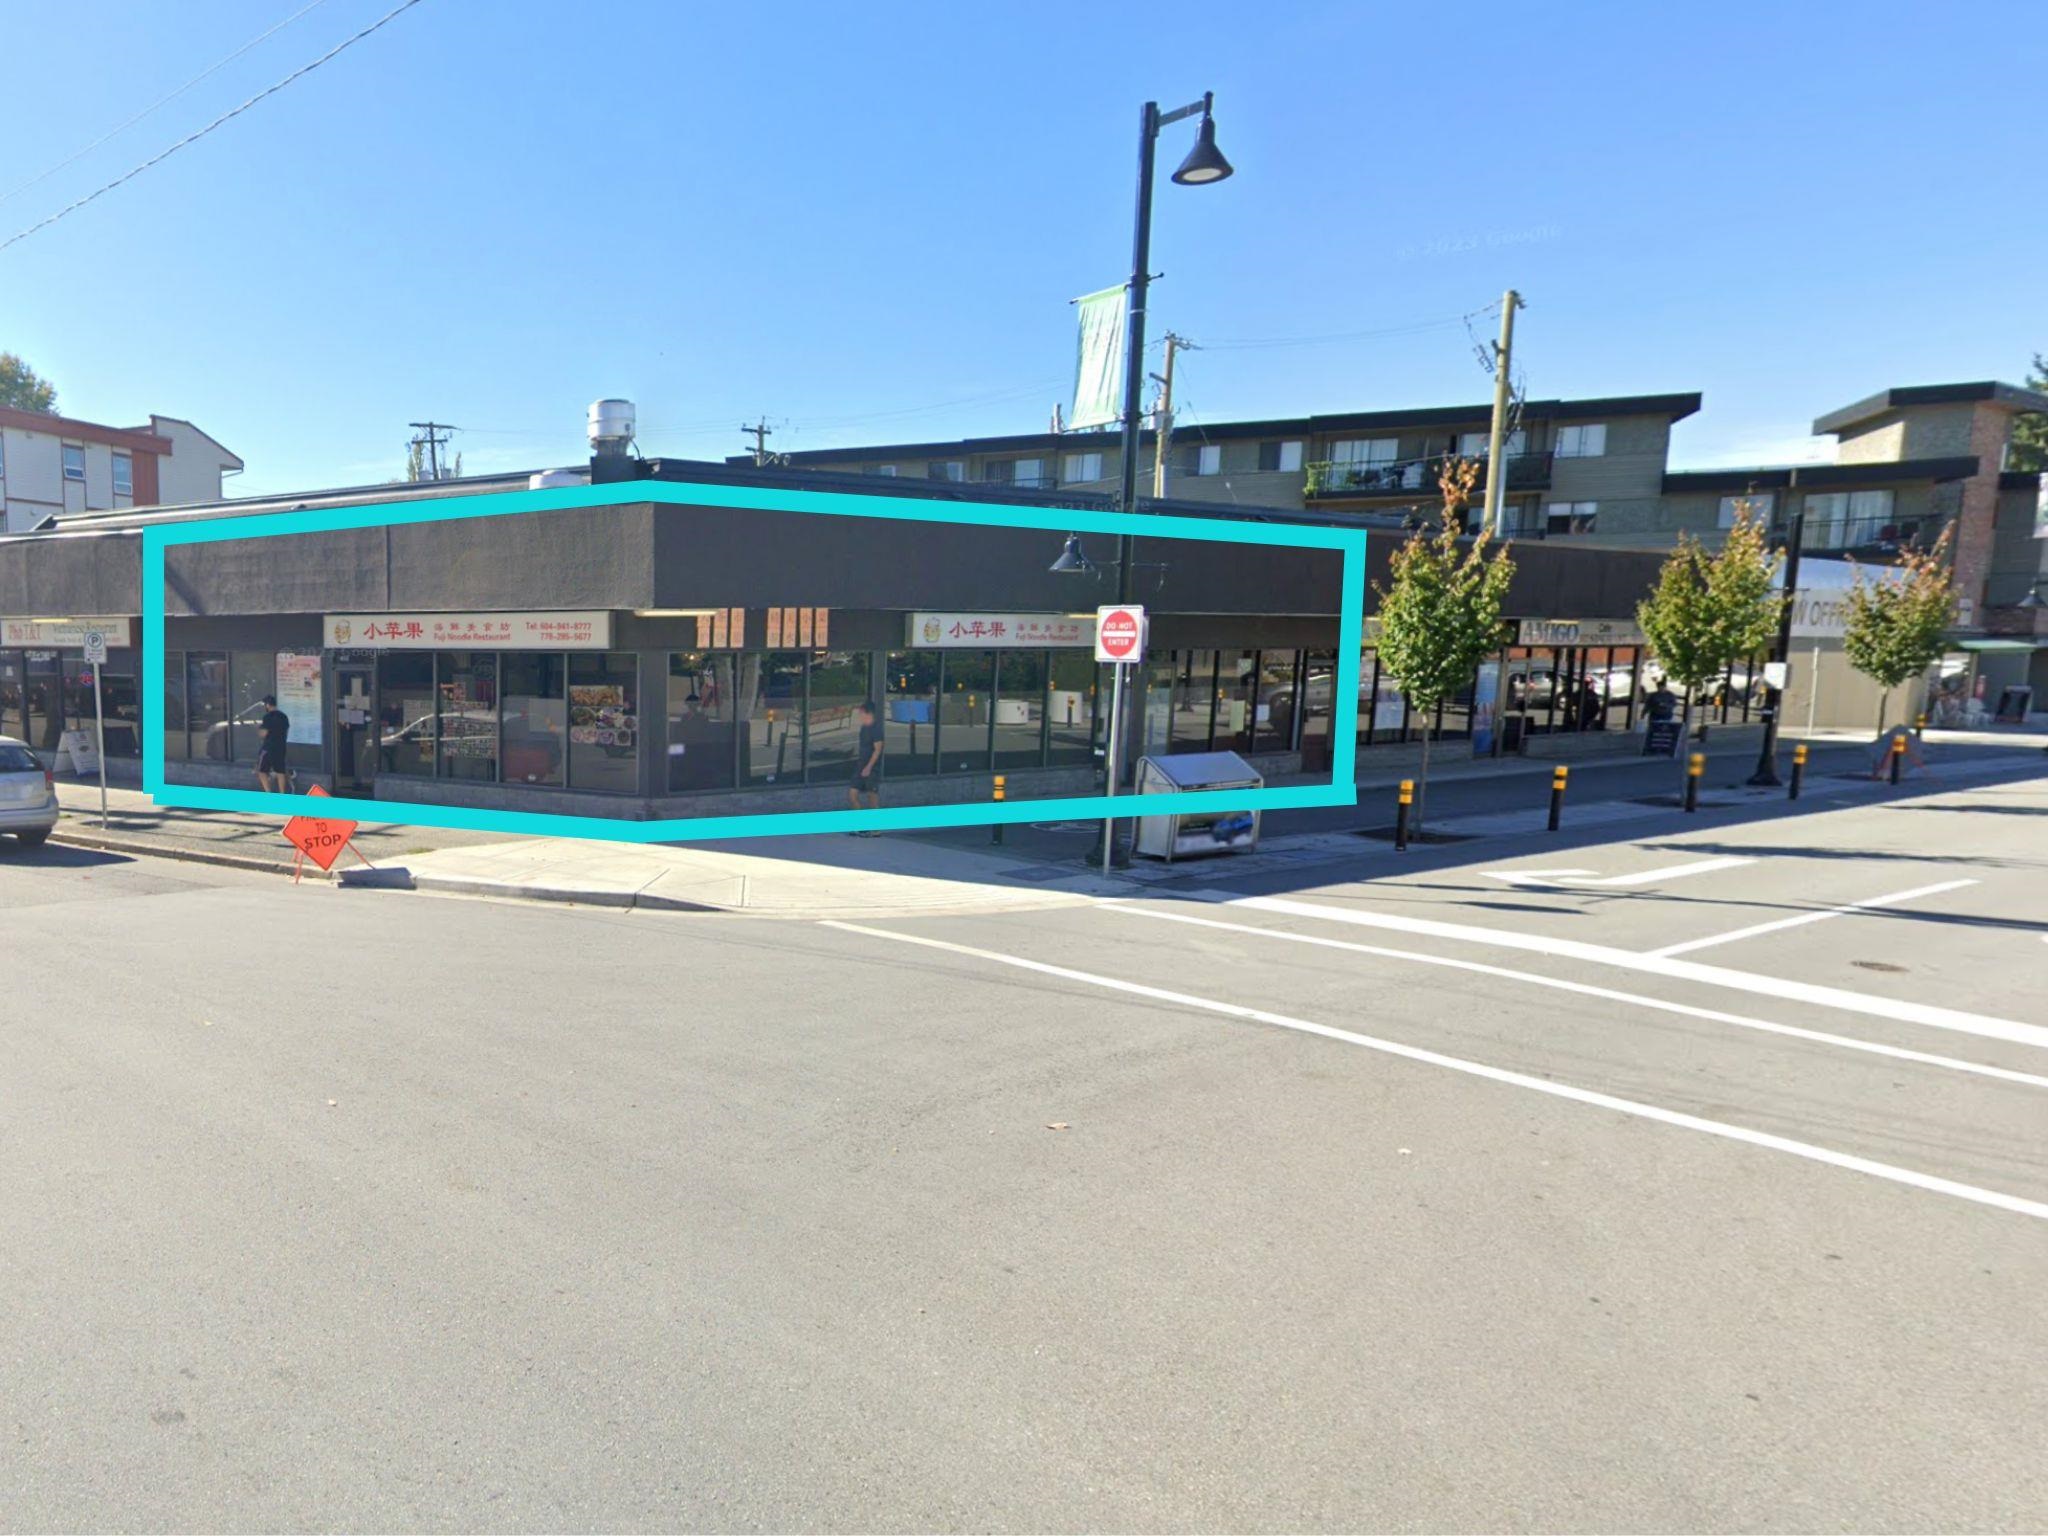 Central Pt Coquitlam Land Commercial for sale:    (Listed 6800-05-05)